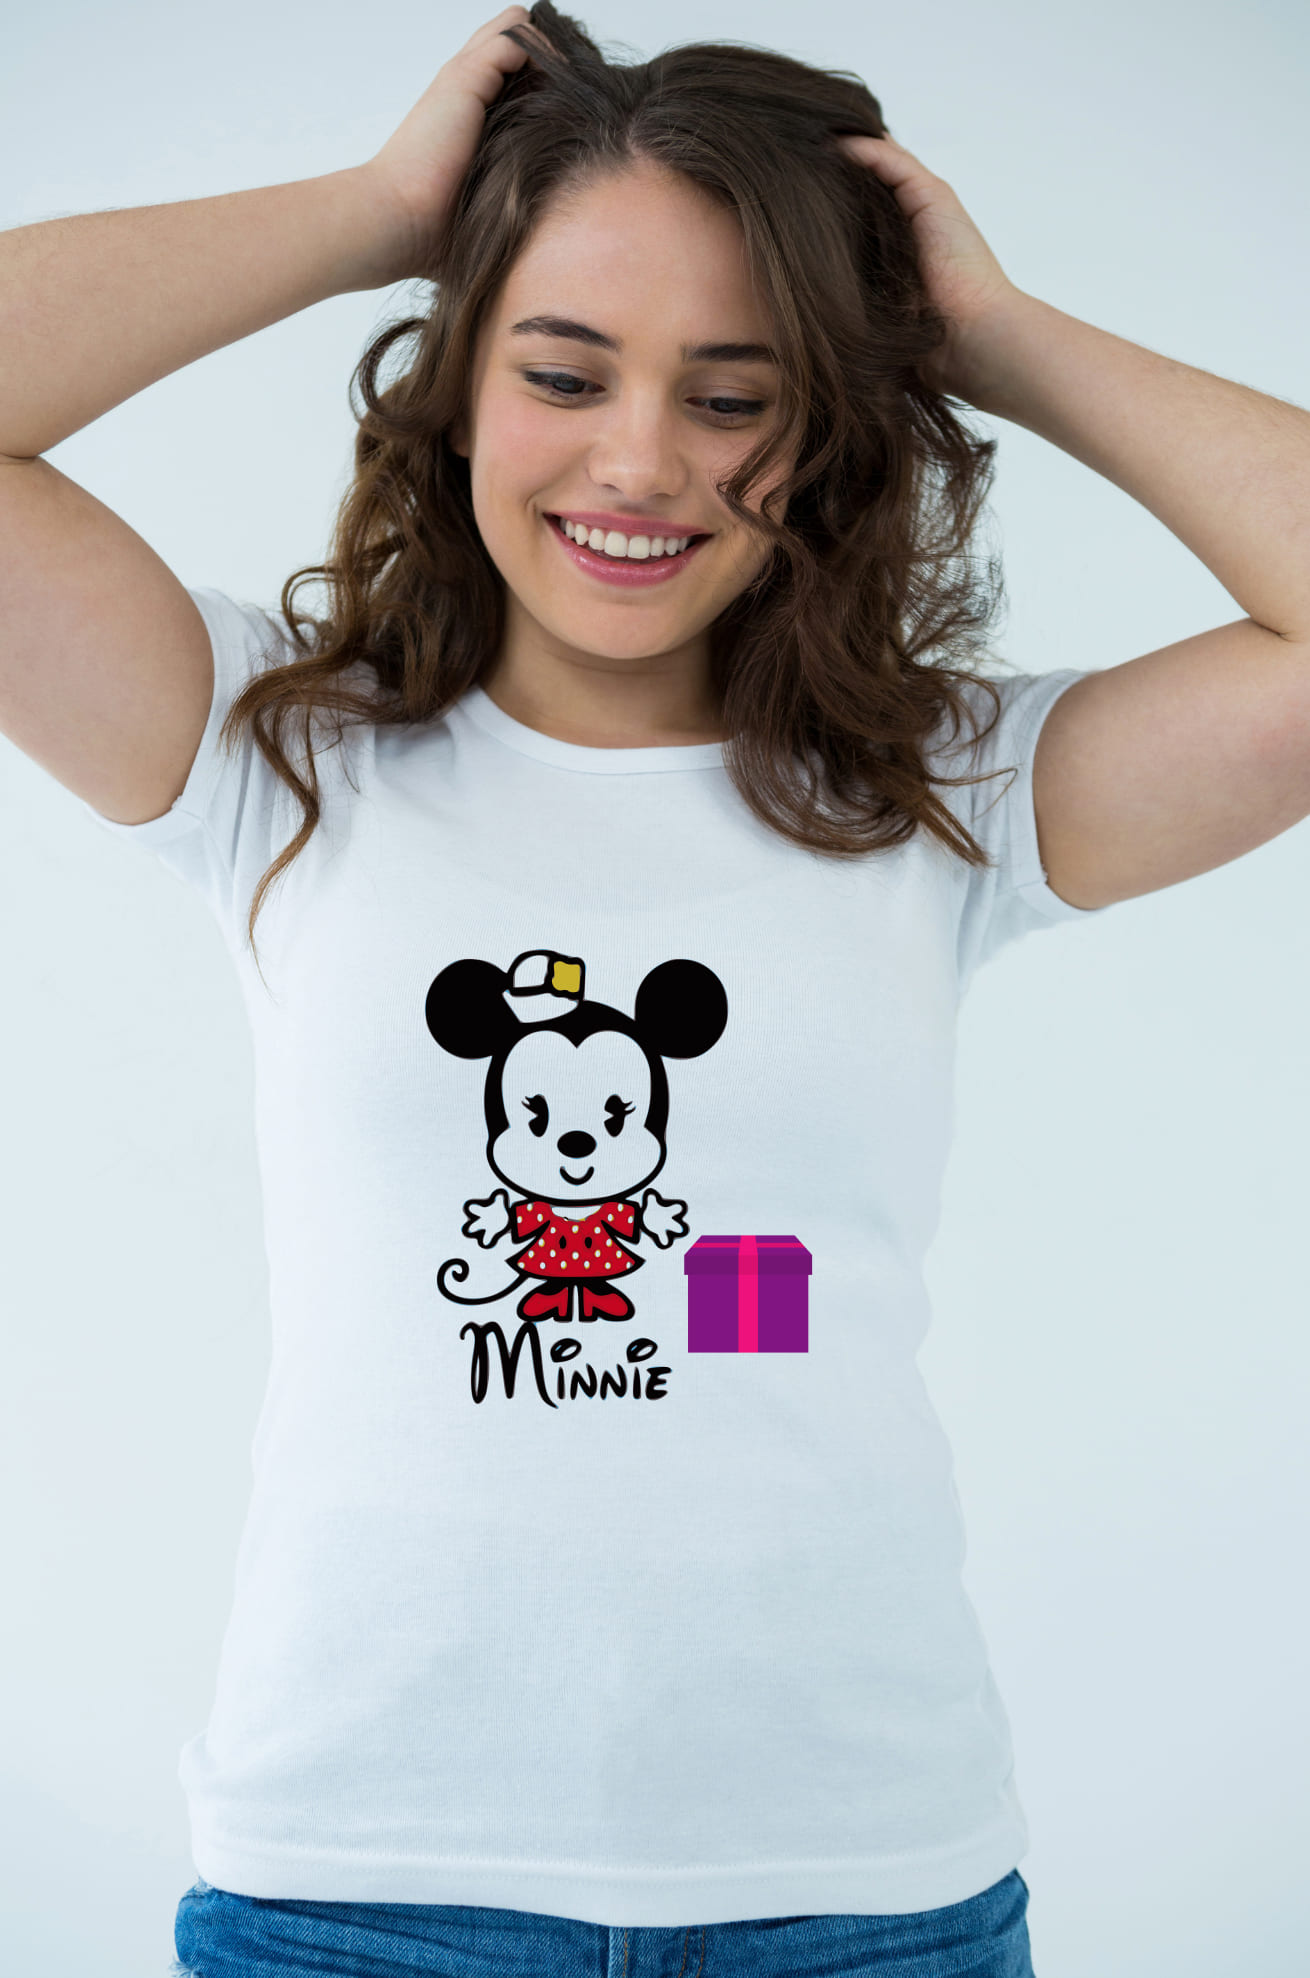 Simple mickey mouse design on the white t-shirt.